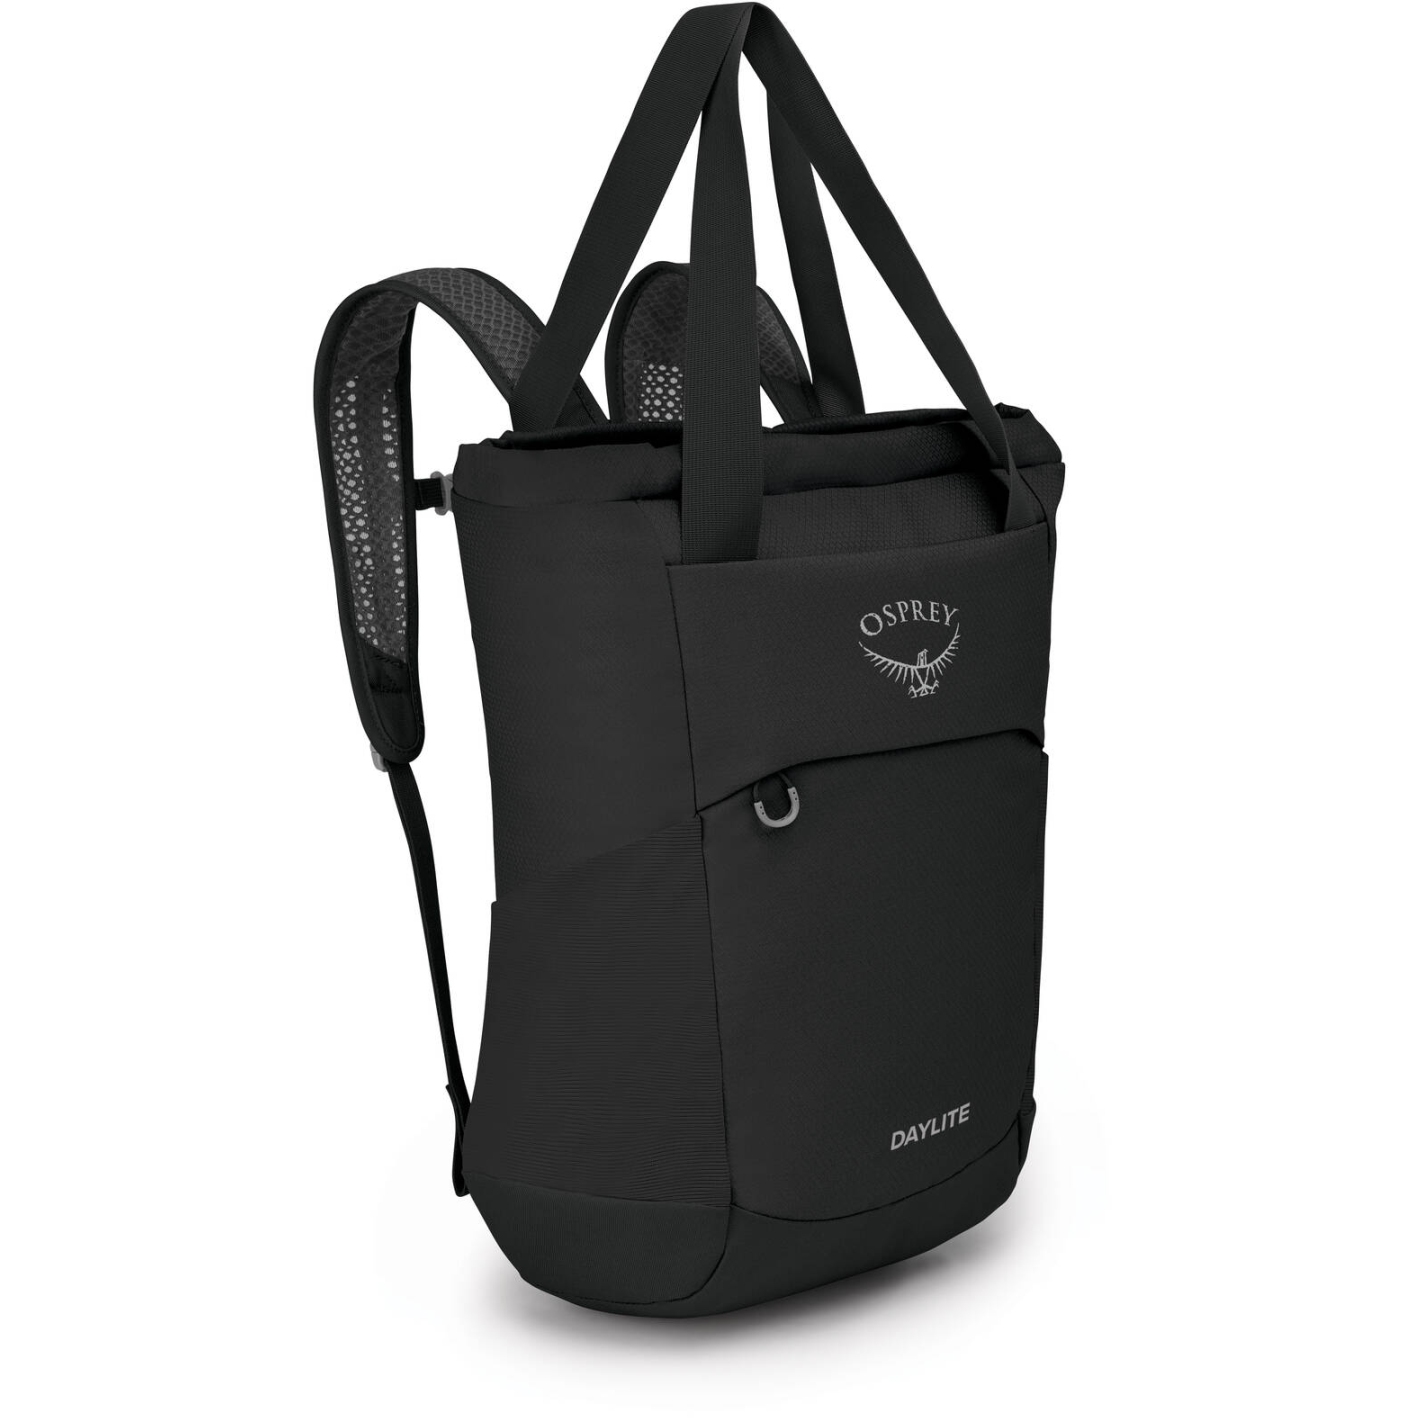 Picture of Osprey Daylite Tote Pack Backpack - Black